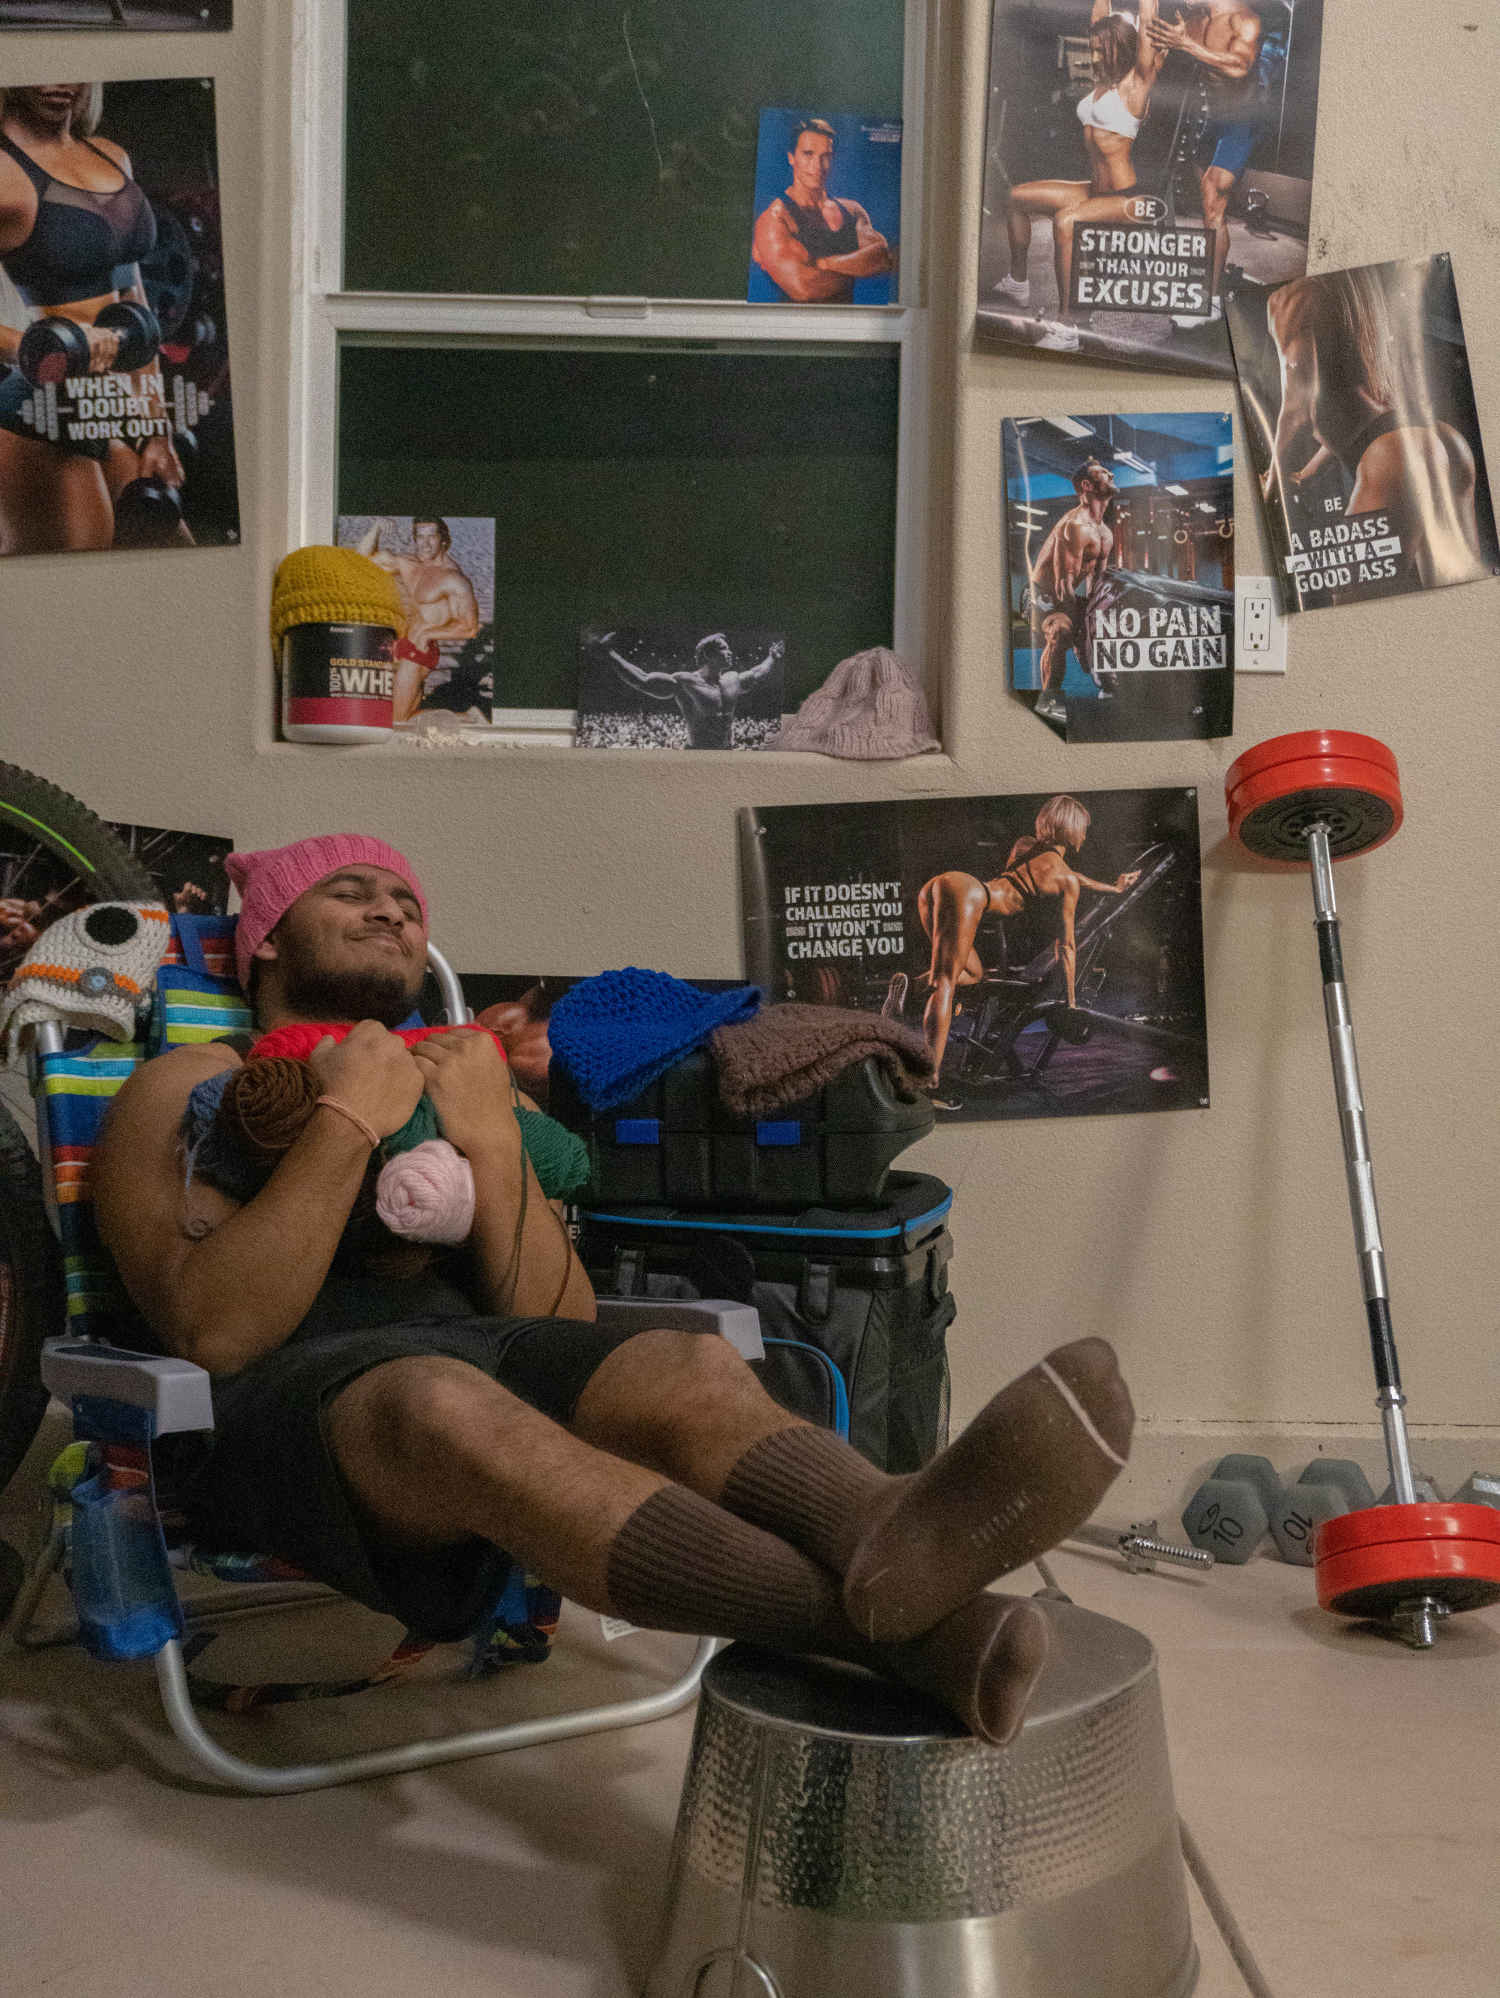 A man sitting in a chair in his room.